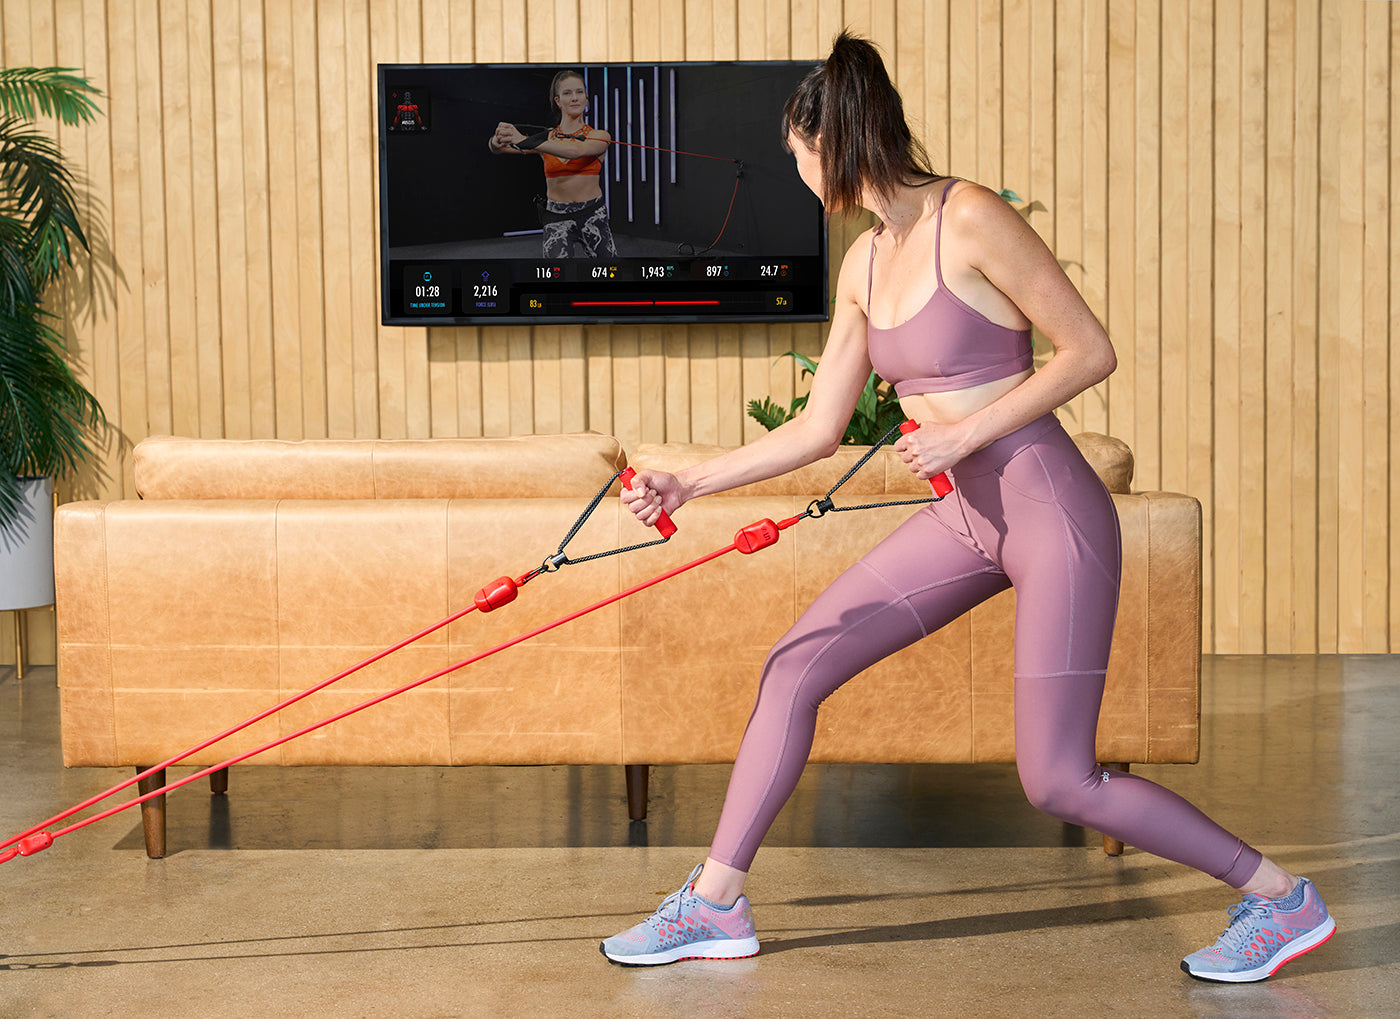 How Effective Are Resistance Bands Workouts?